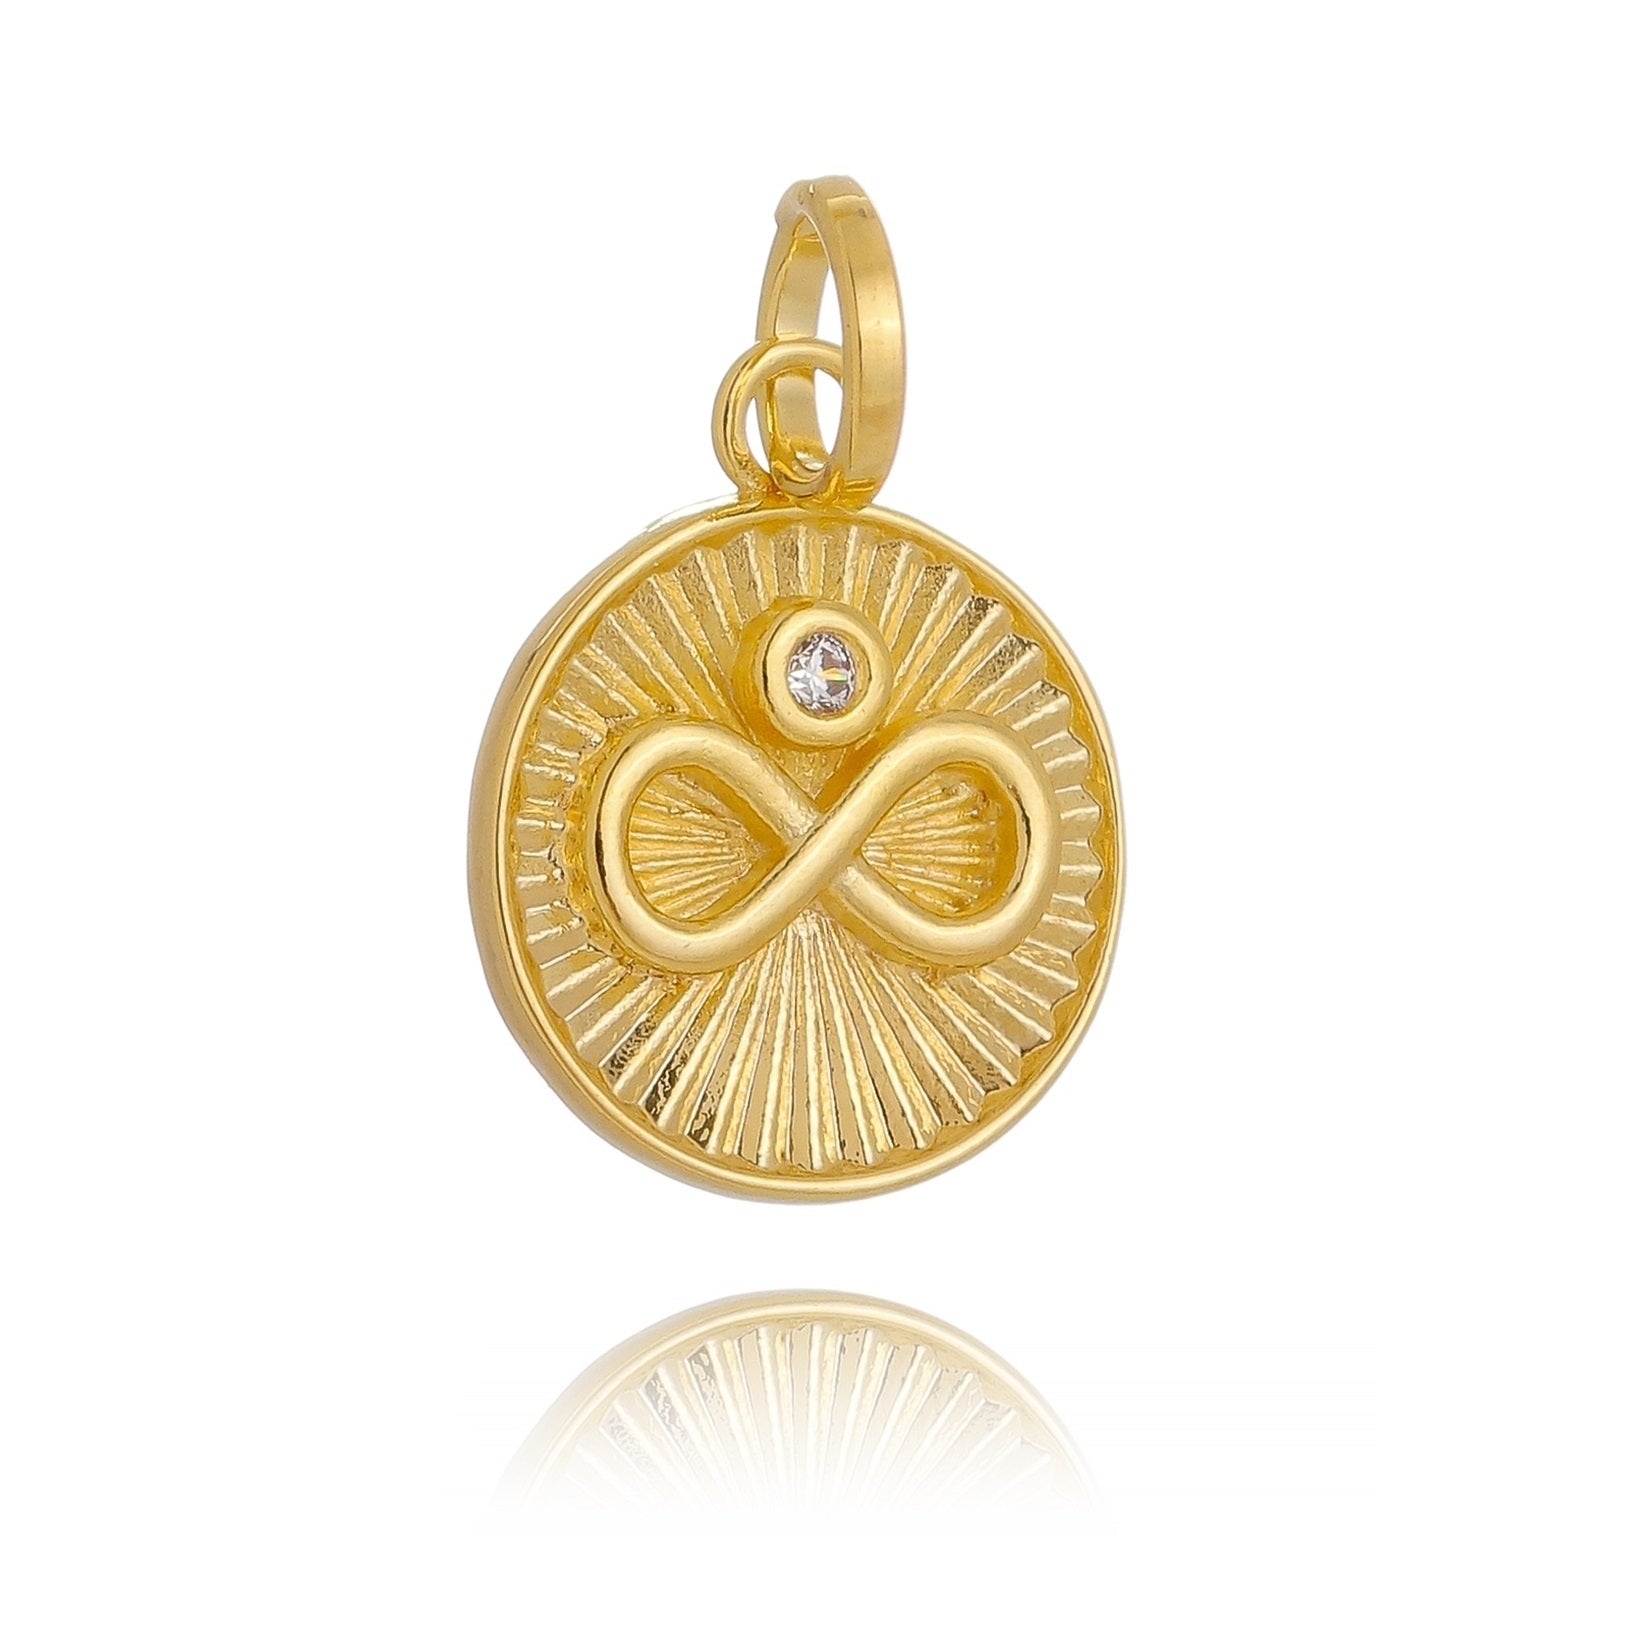 GoldFi 18k Gold Filled Infinity Charm Spokes From Center to Edges Pendant Solitaire Cubic Zirconia